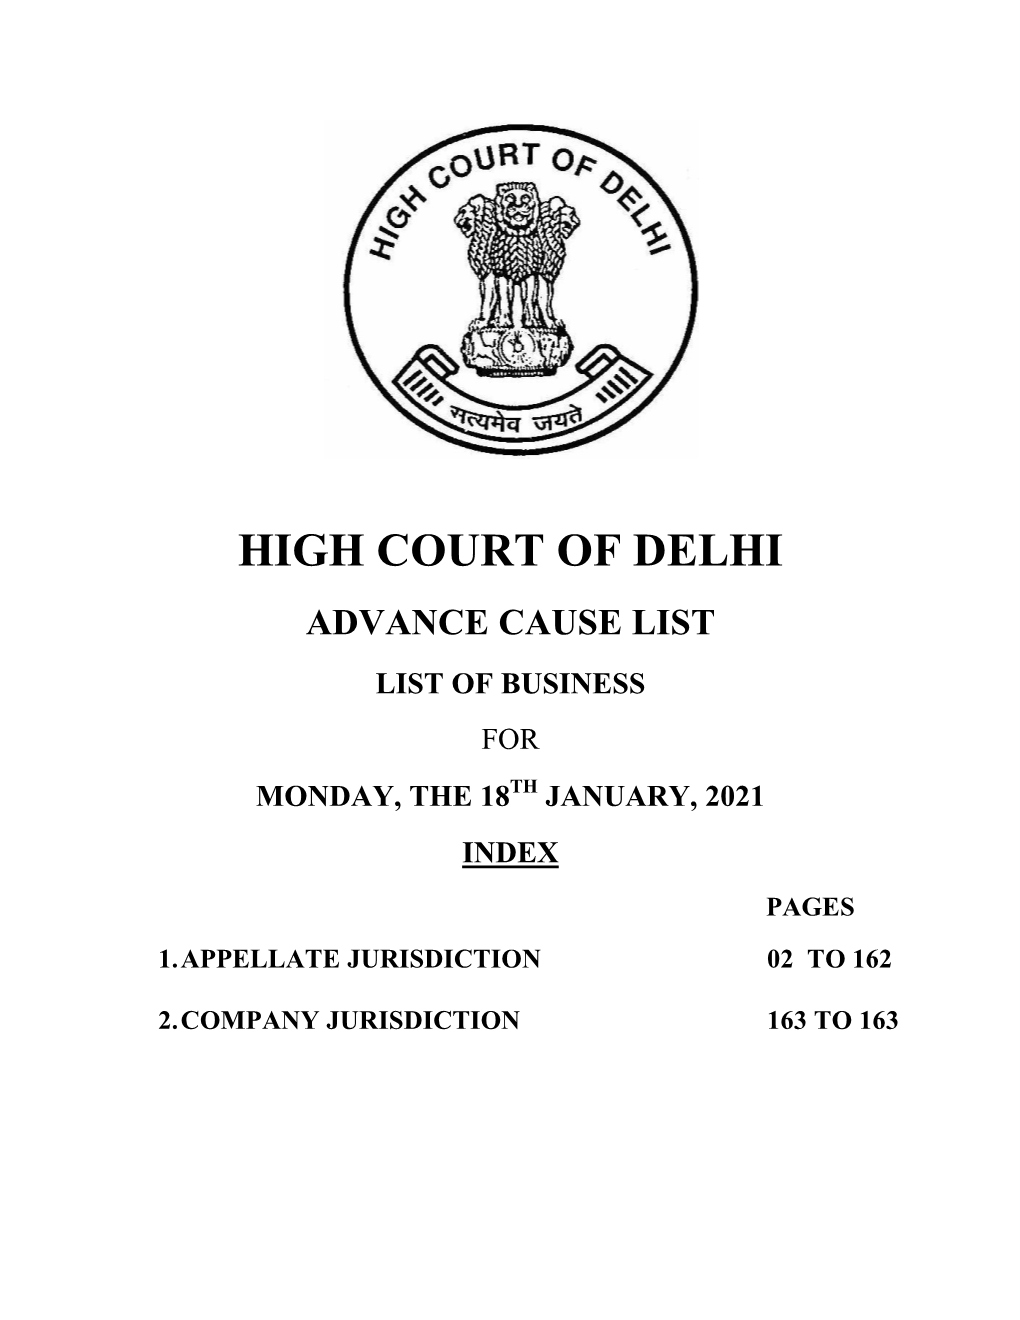 Advance Cause List List of Business for Monday, the 18Th January, 2021 Index Pages